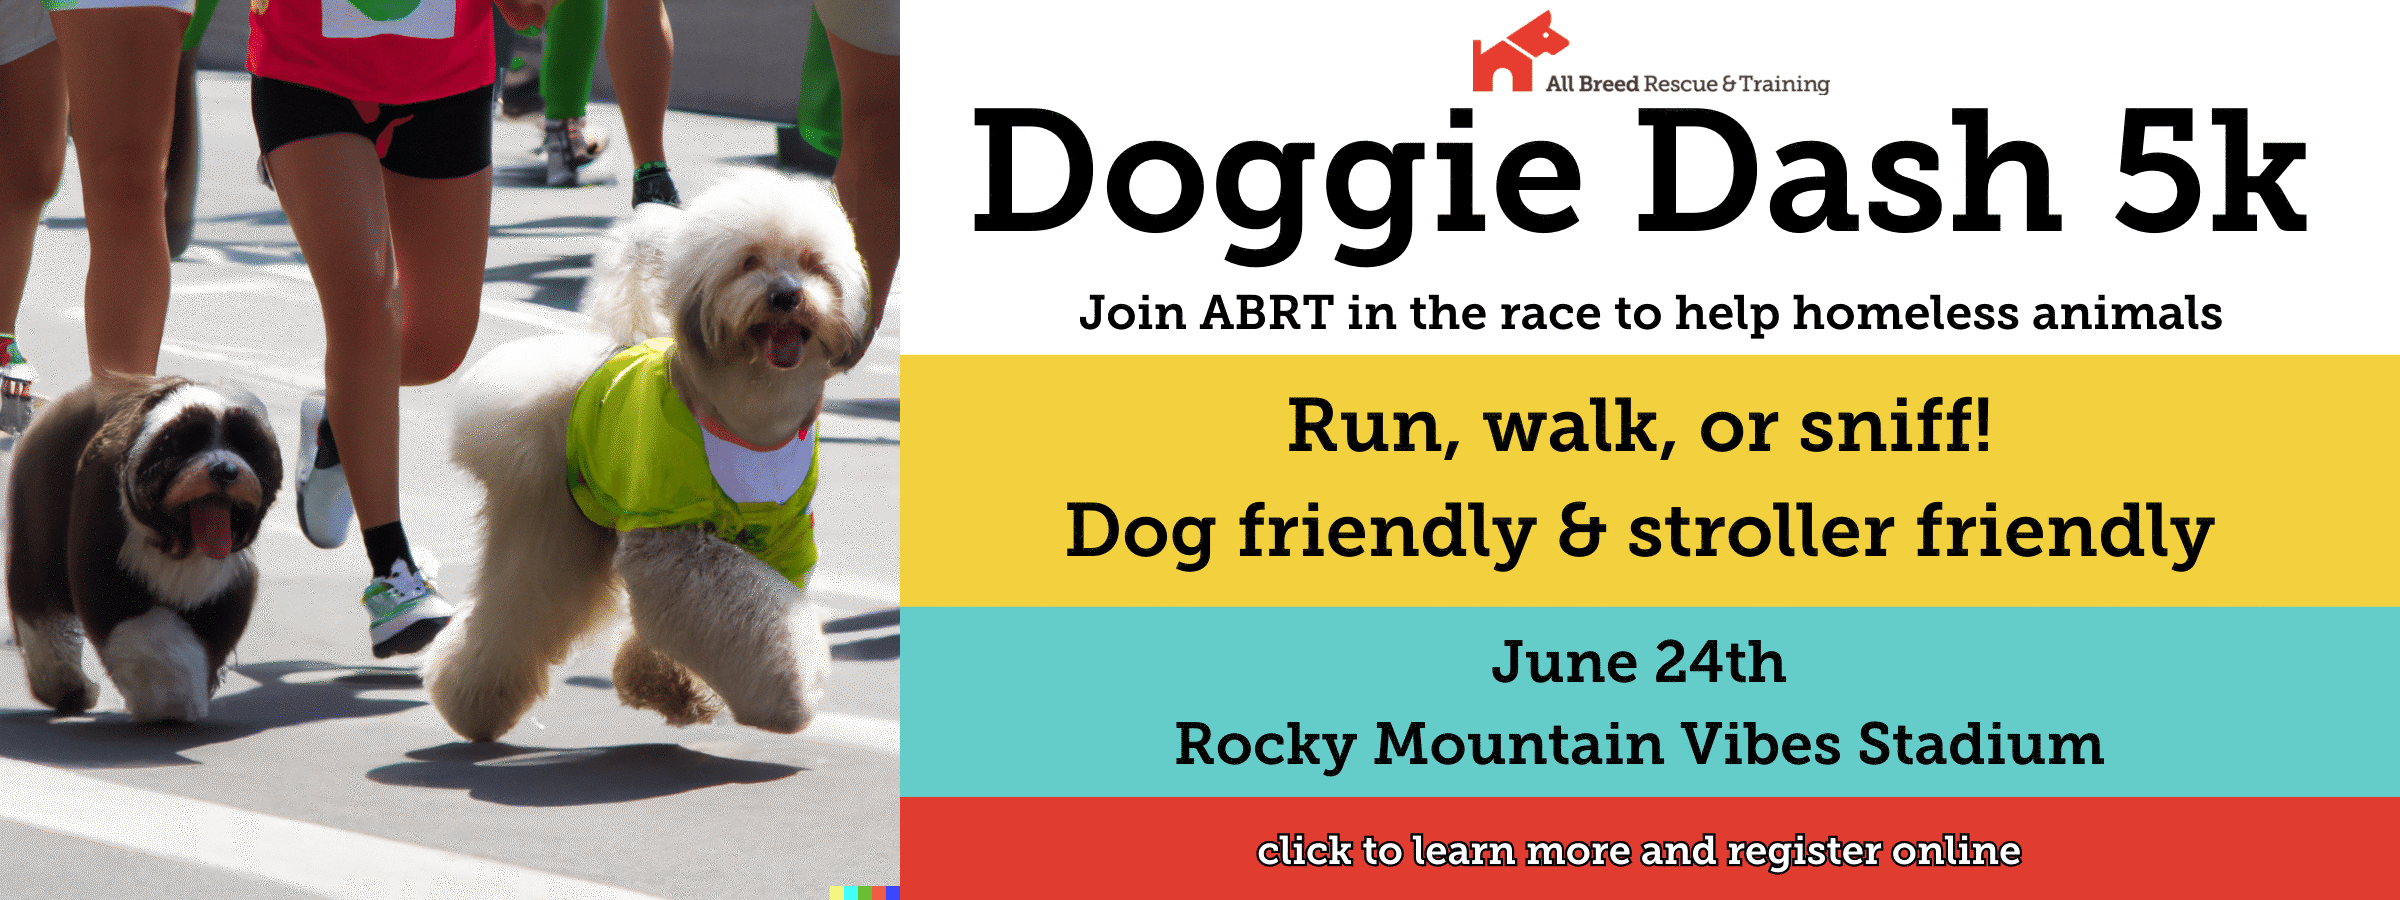 Join ABRT for our 10th Annual Doggie Dash 5k